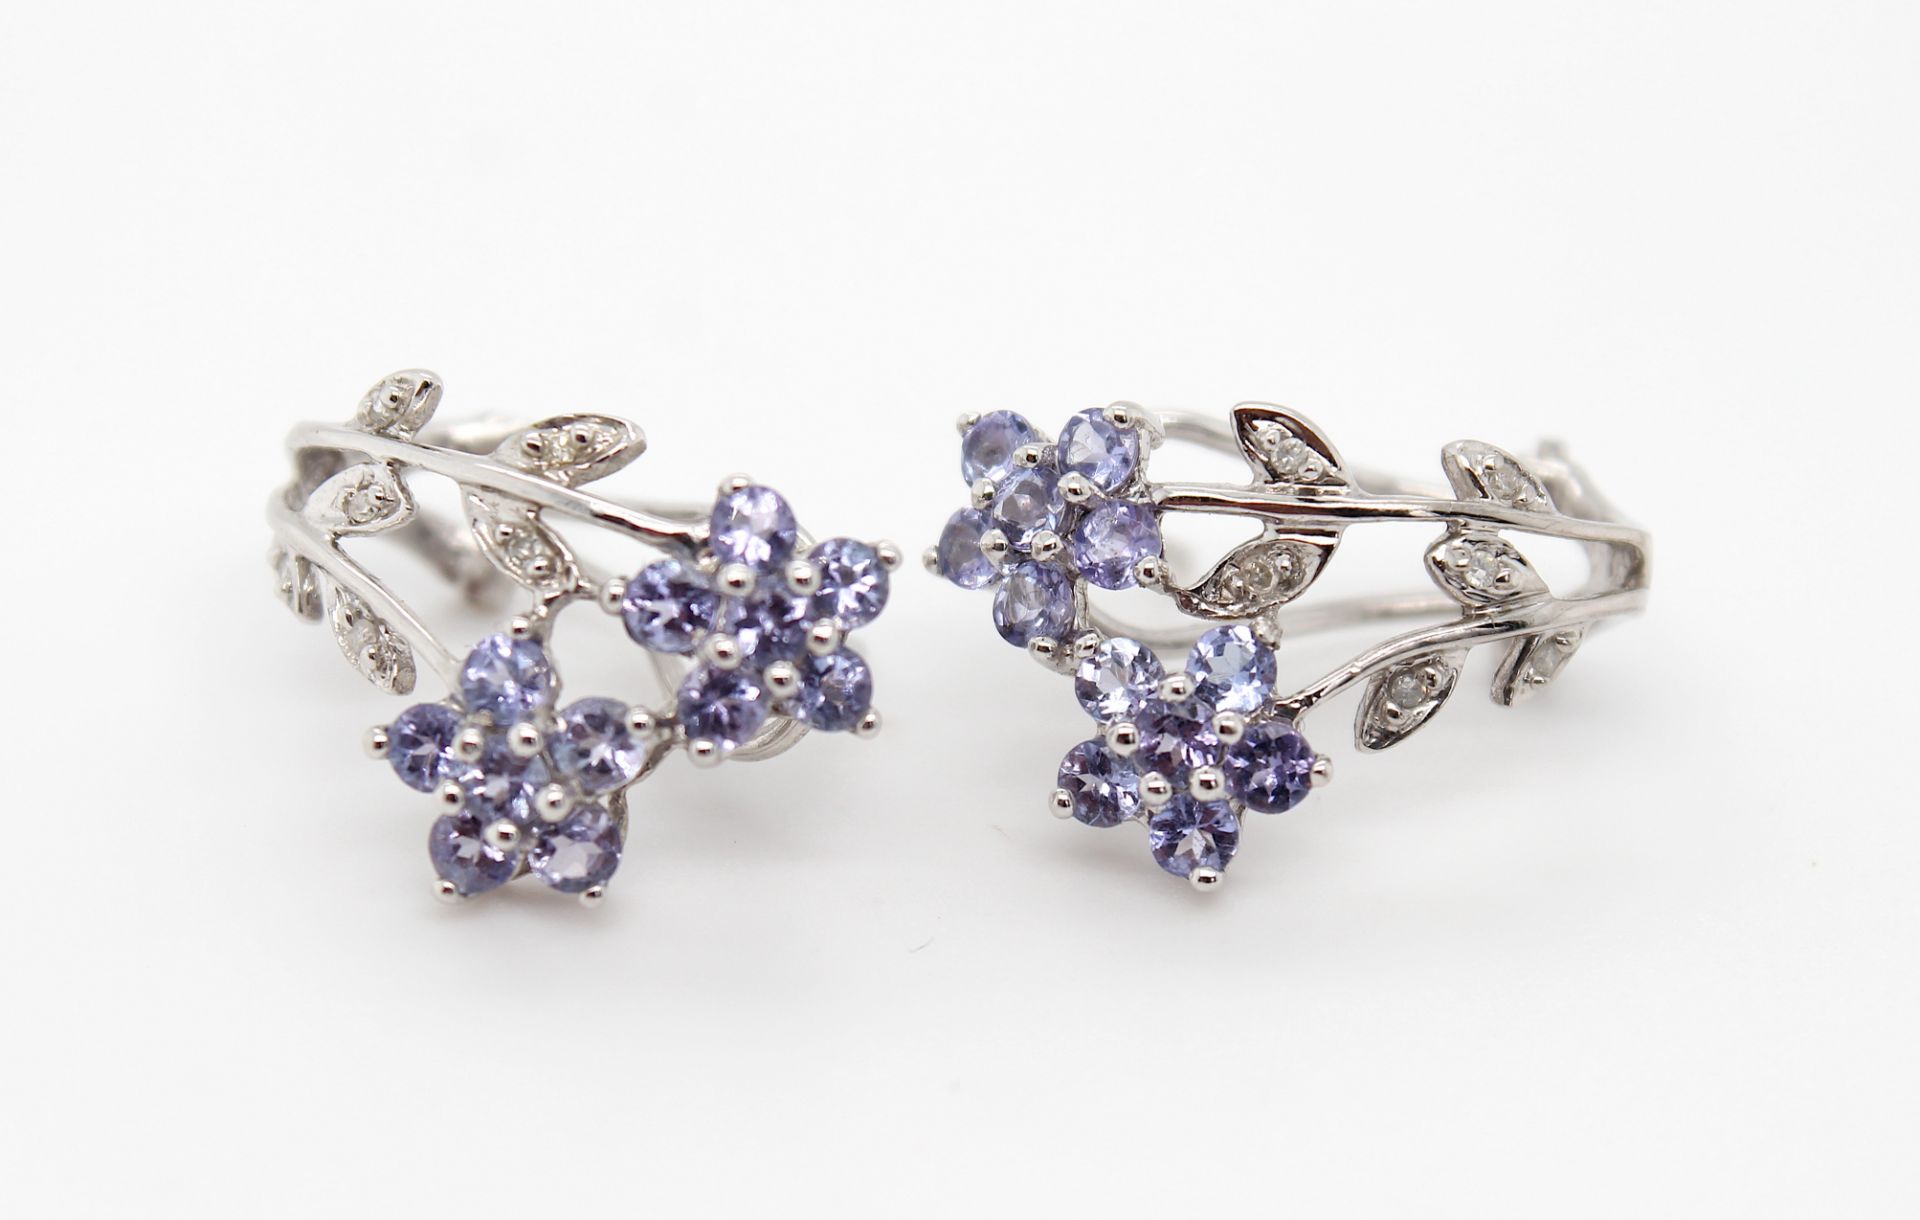 Stud earrings and a pendant with tanzanites and diamonds